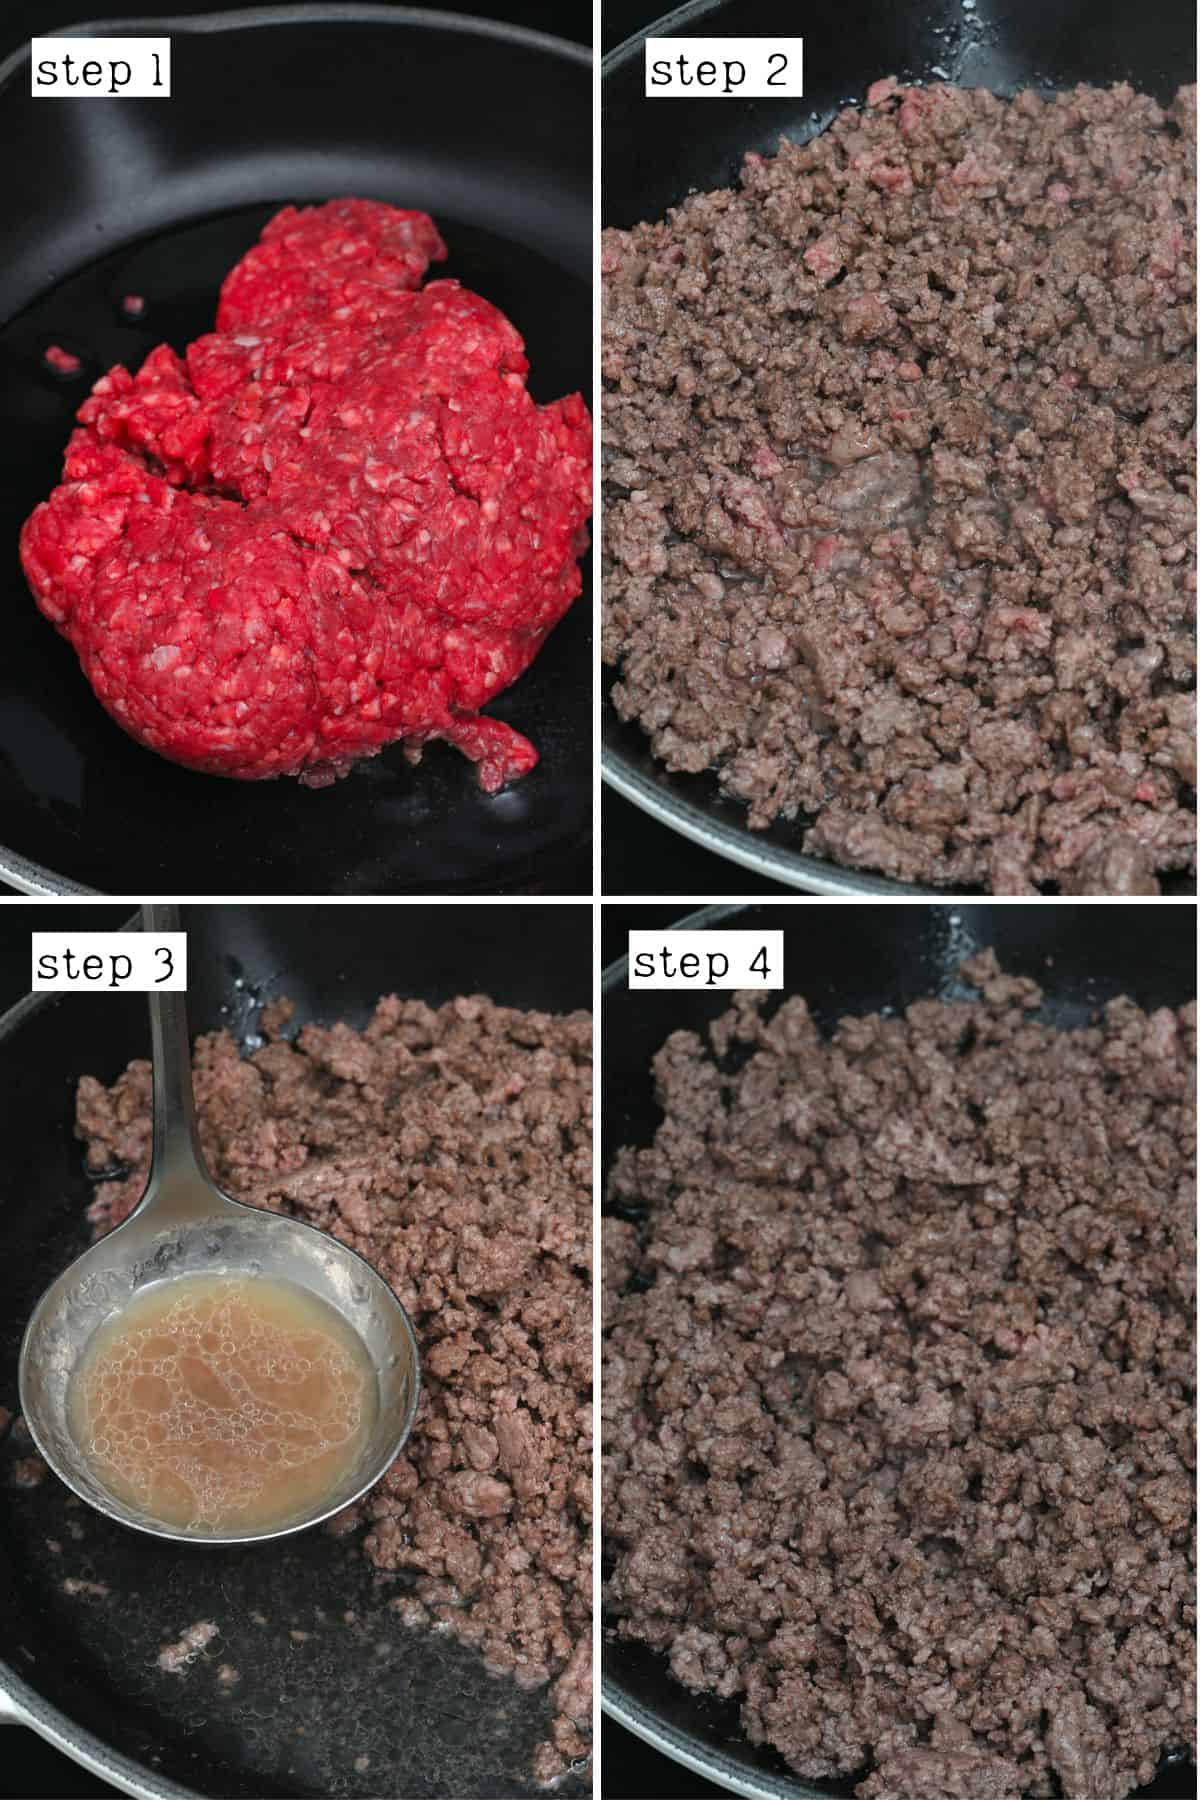 Steps for cooking ground beef